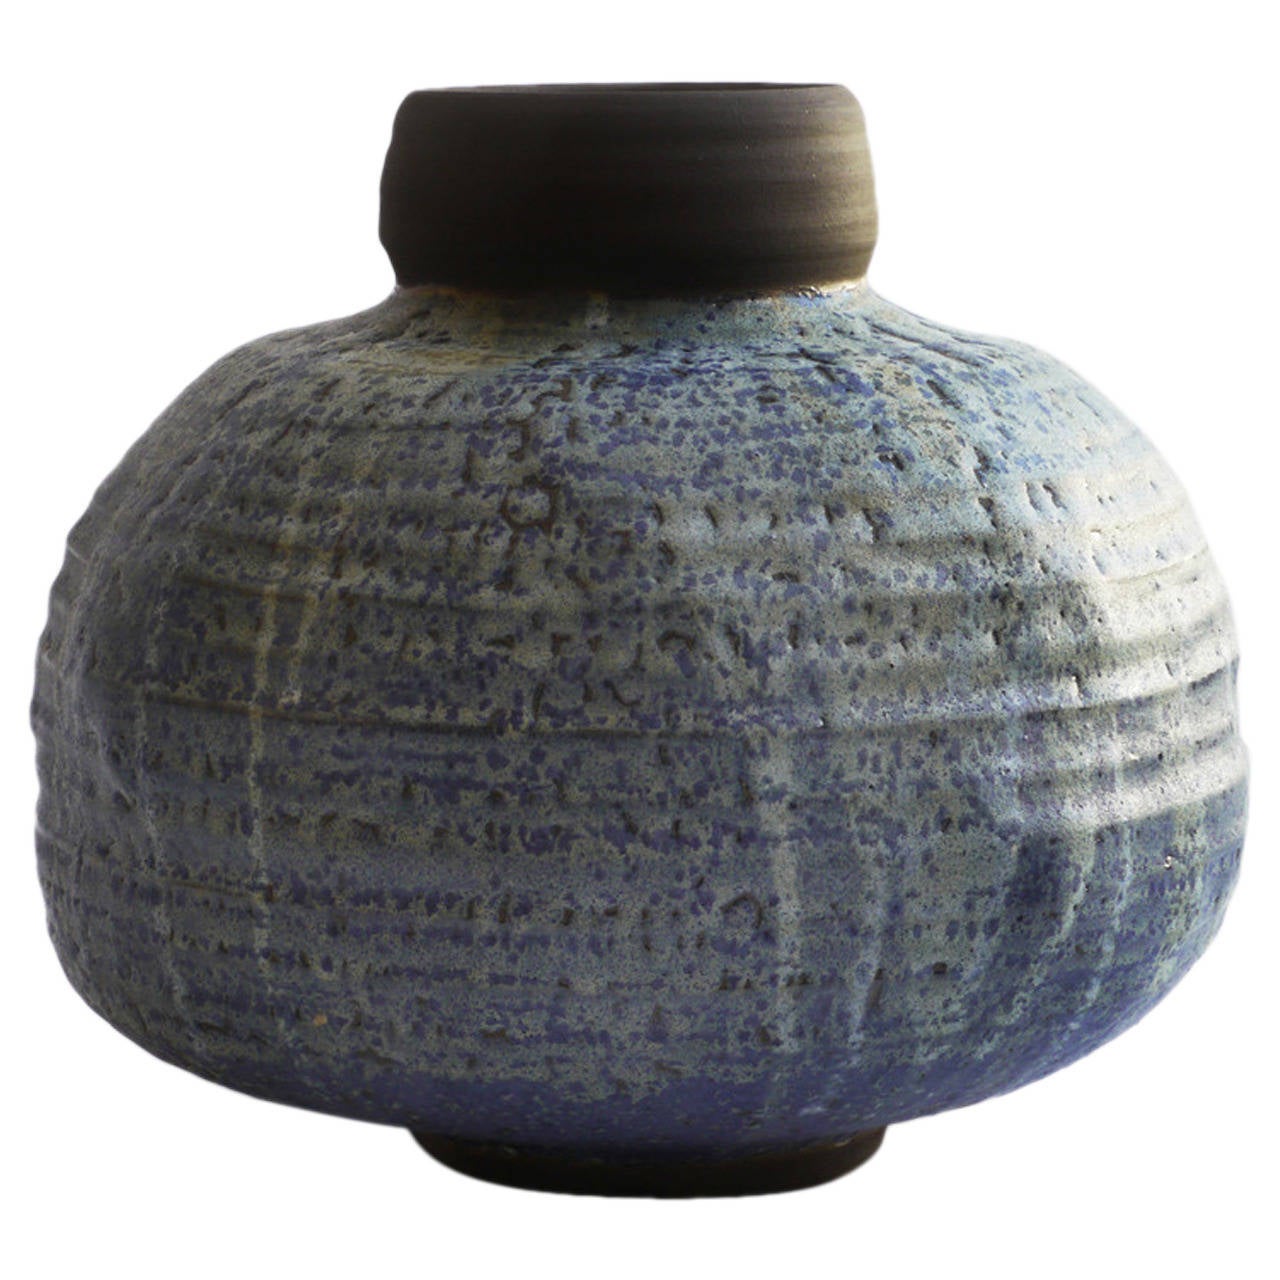 "Asmi 3" Stoneware Vessel with Blue and White Glazes For Sale